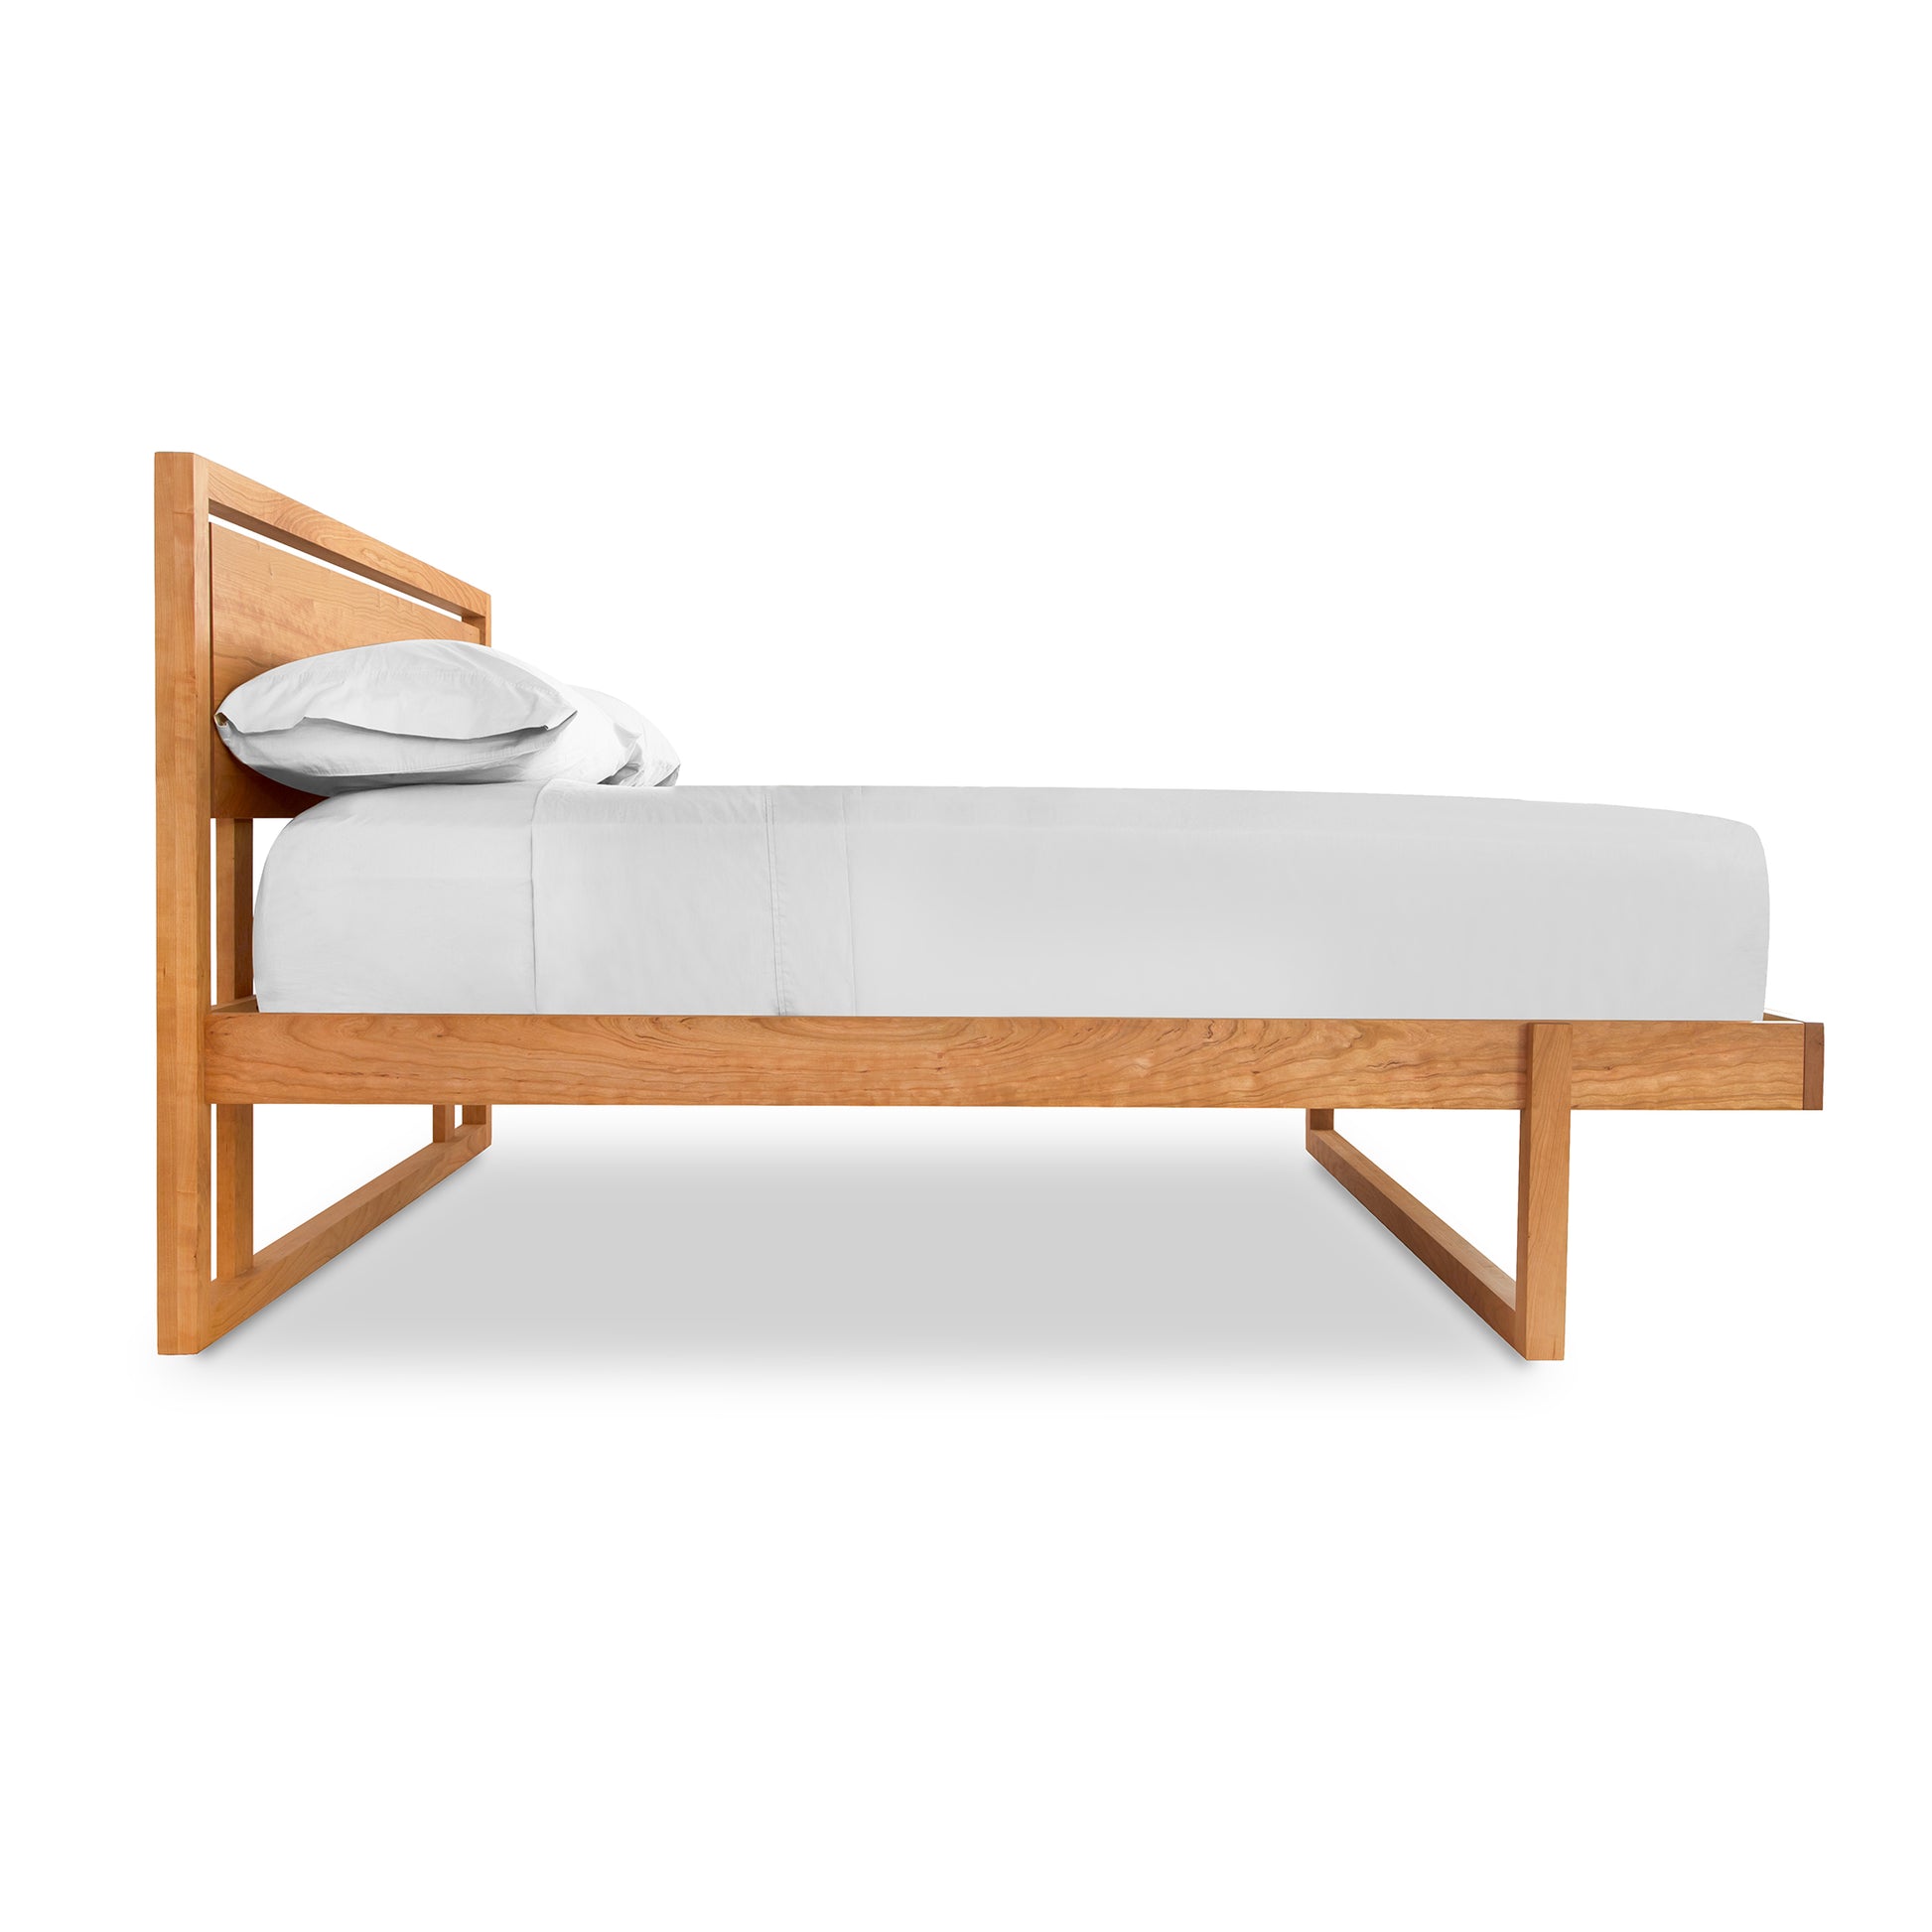 A sustainably harvested Vermont Furniture Designs cherry wood Pendant Bed frame with a simple design, featuring a white mattress and pillows, isolated on a white background.